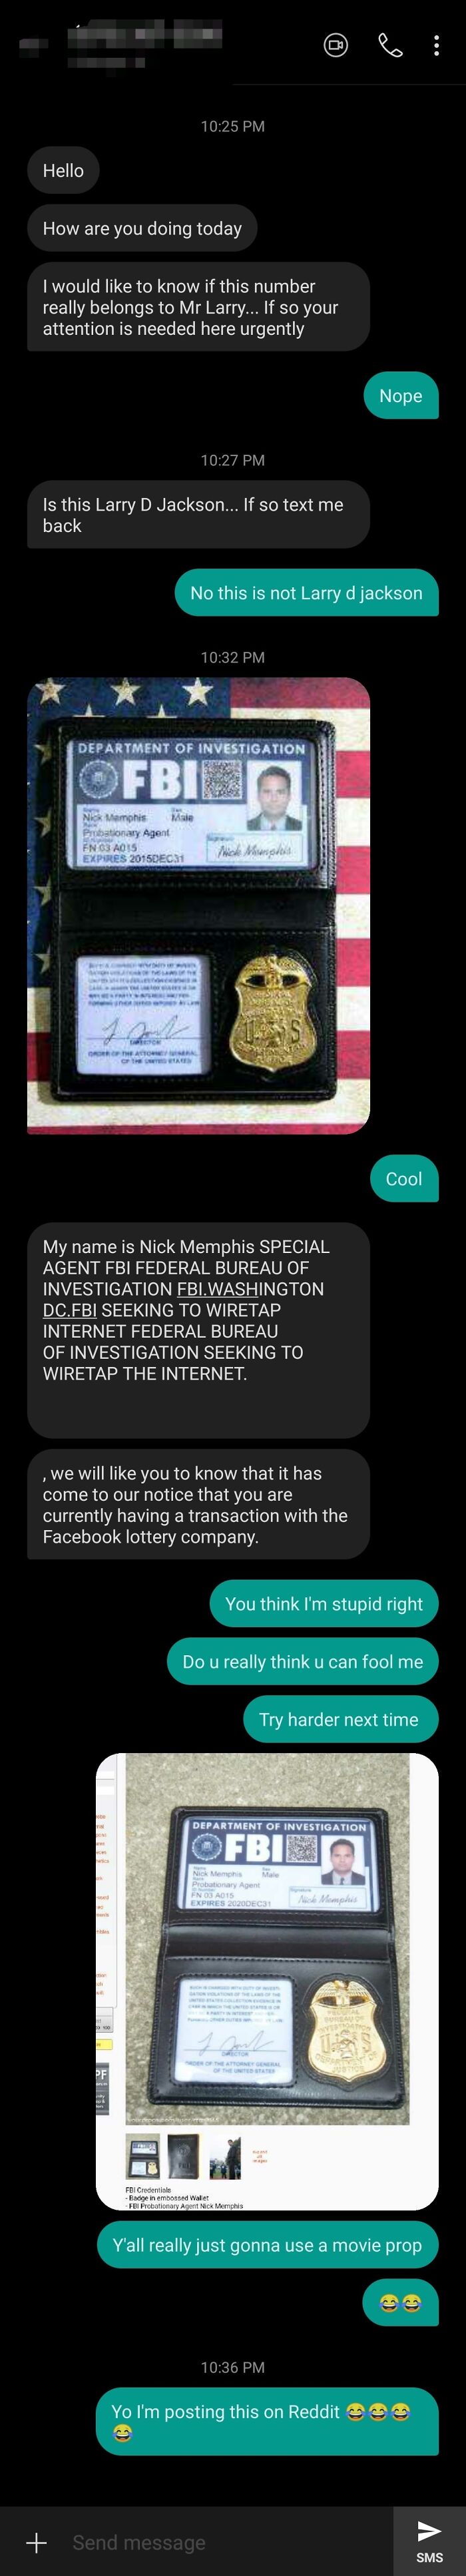 Some Guy Texted Me And Said He Is From FBI, And He Showed Me His Id, I Image Searched It, Turned Out The Id Was Just A Movie Prop. Mans Didn't Even Try